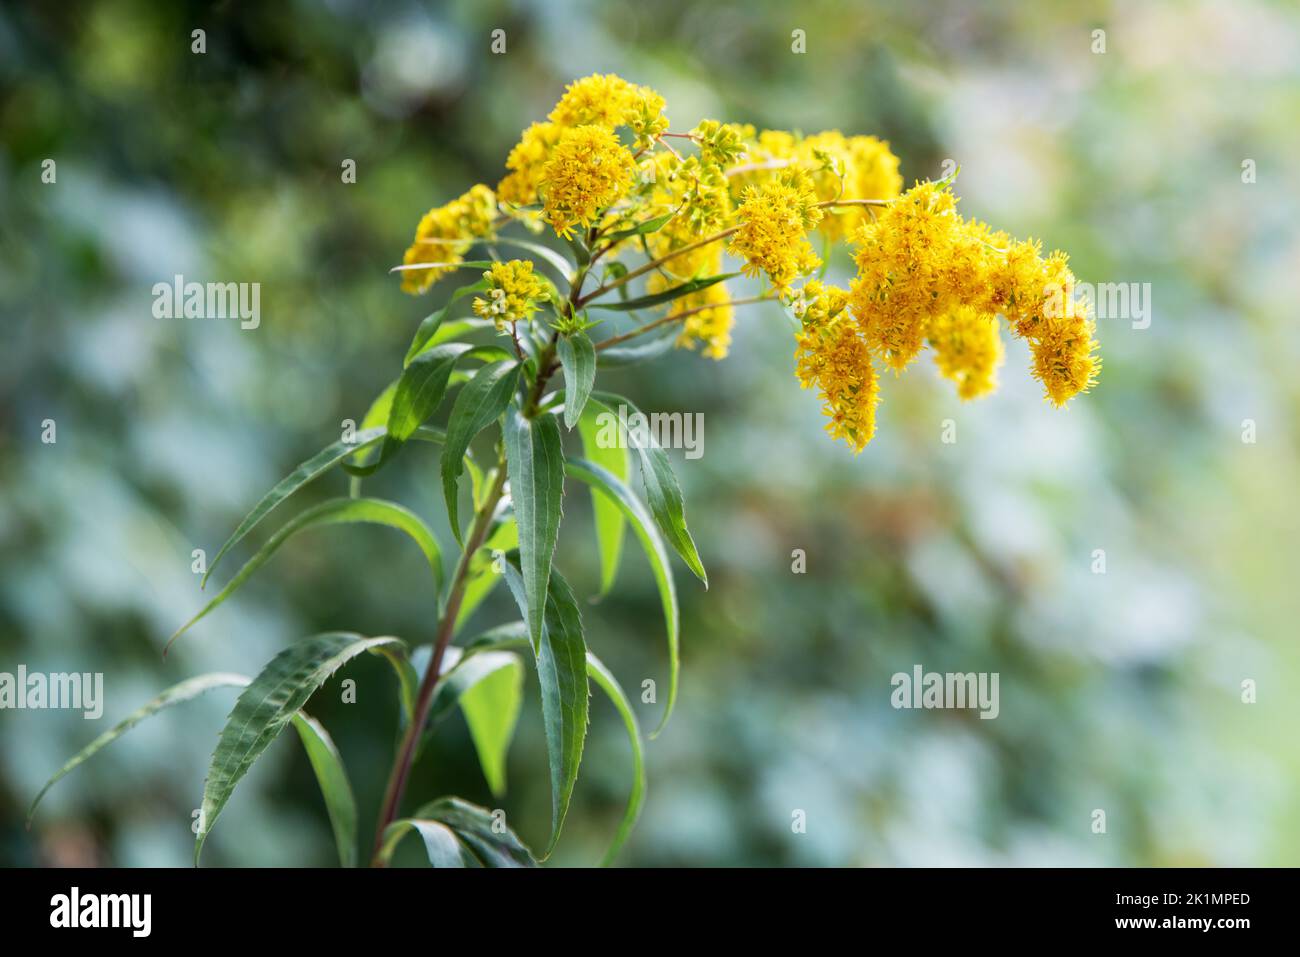 goldenrod flowers  on green blurred background Stock Photo